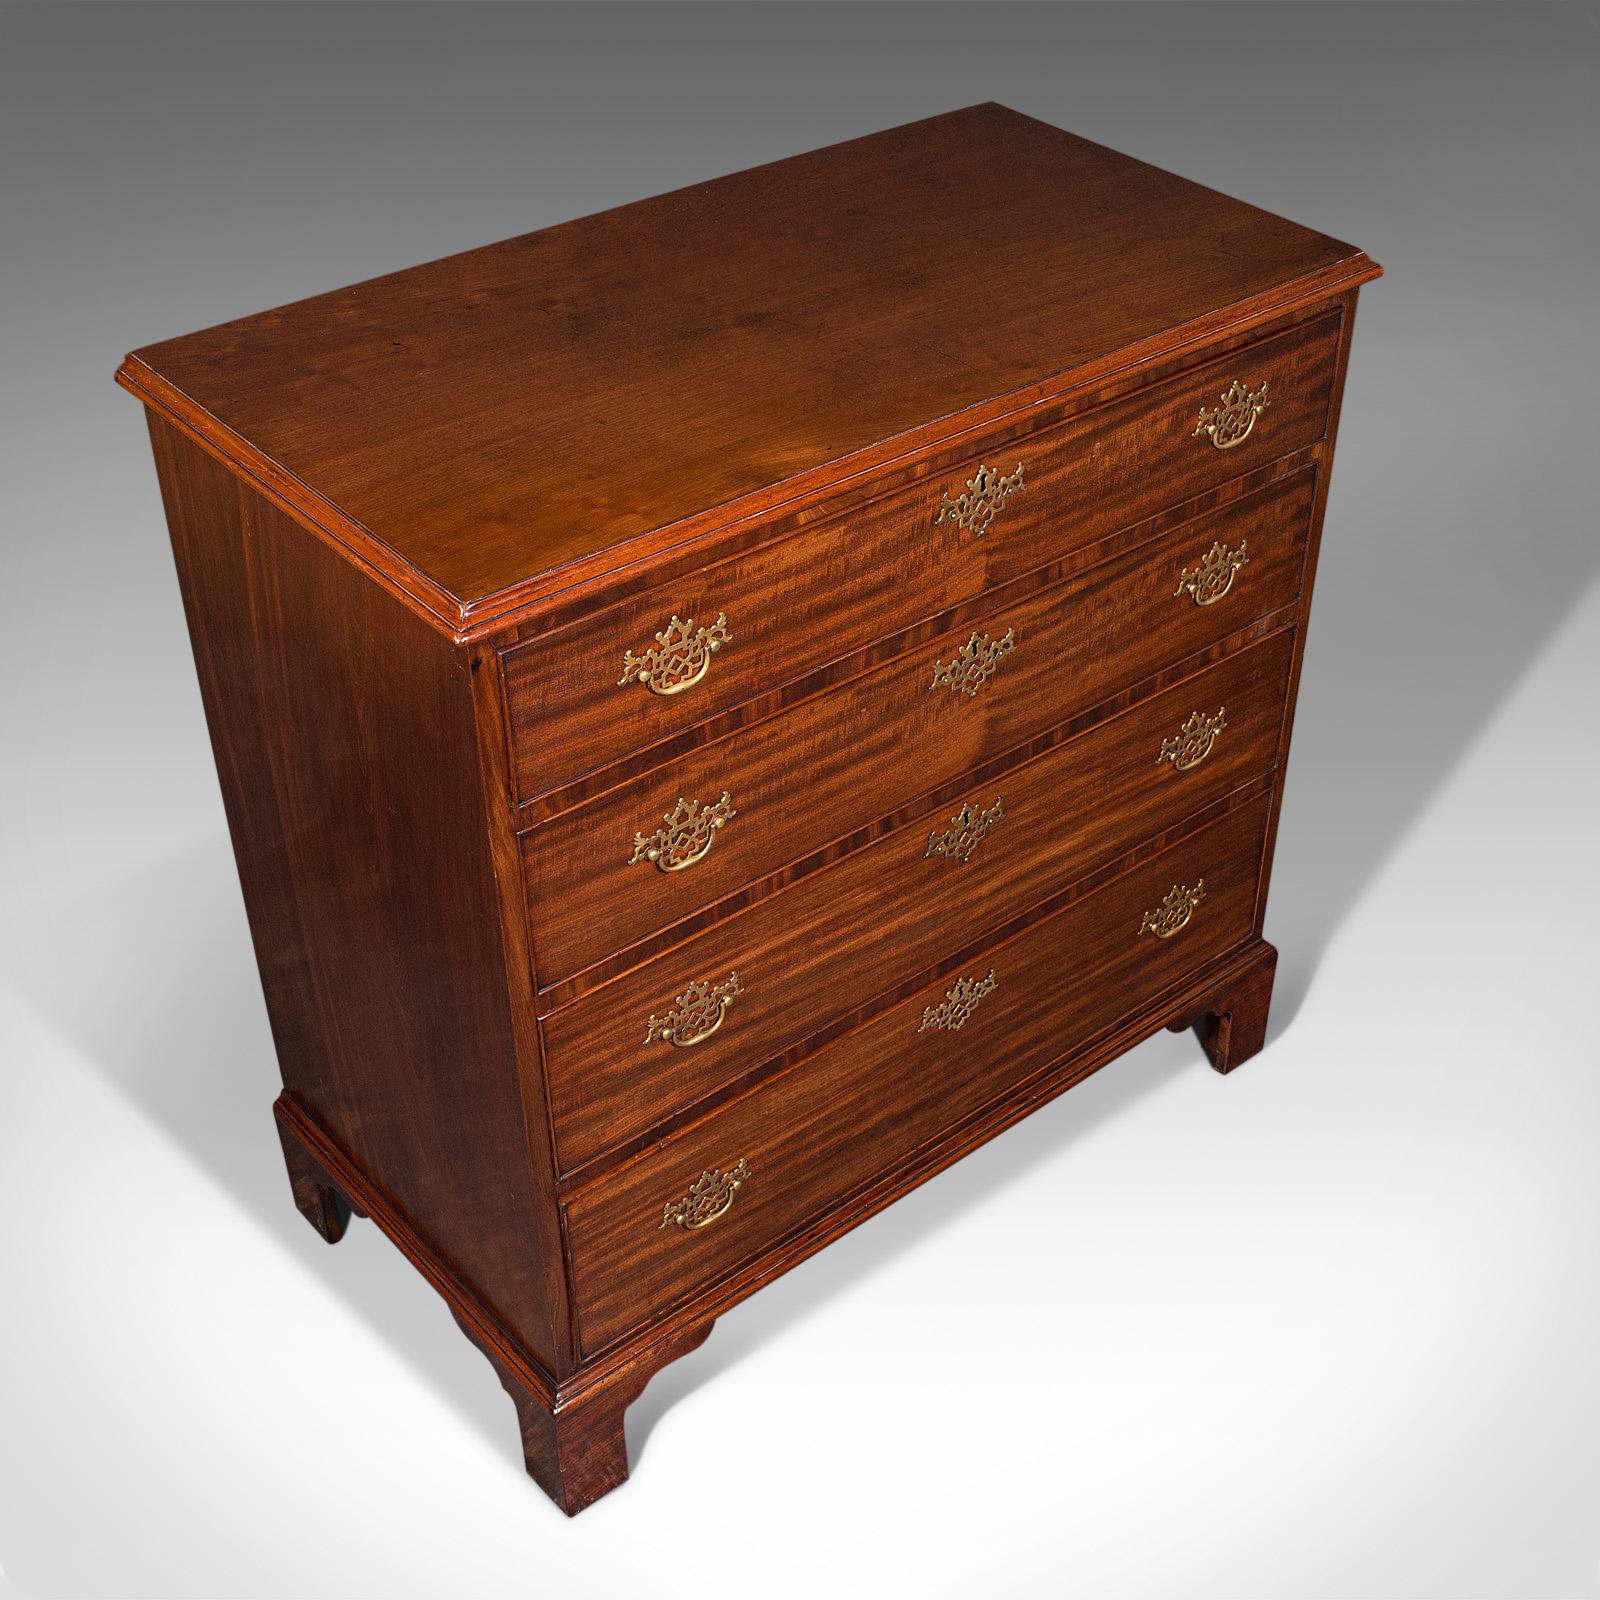 Antique Gentleman's Chest of Drawers, English, Mahogany, Bedroom, Georgian, 1800 In Good Condition For Sale In Hele, Devon, GB